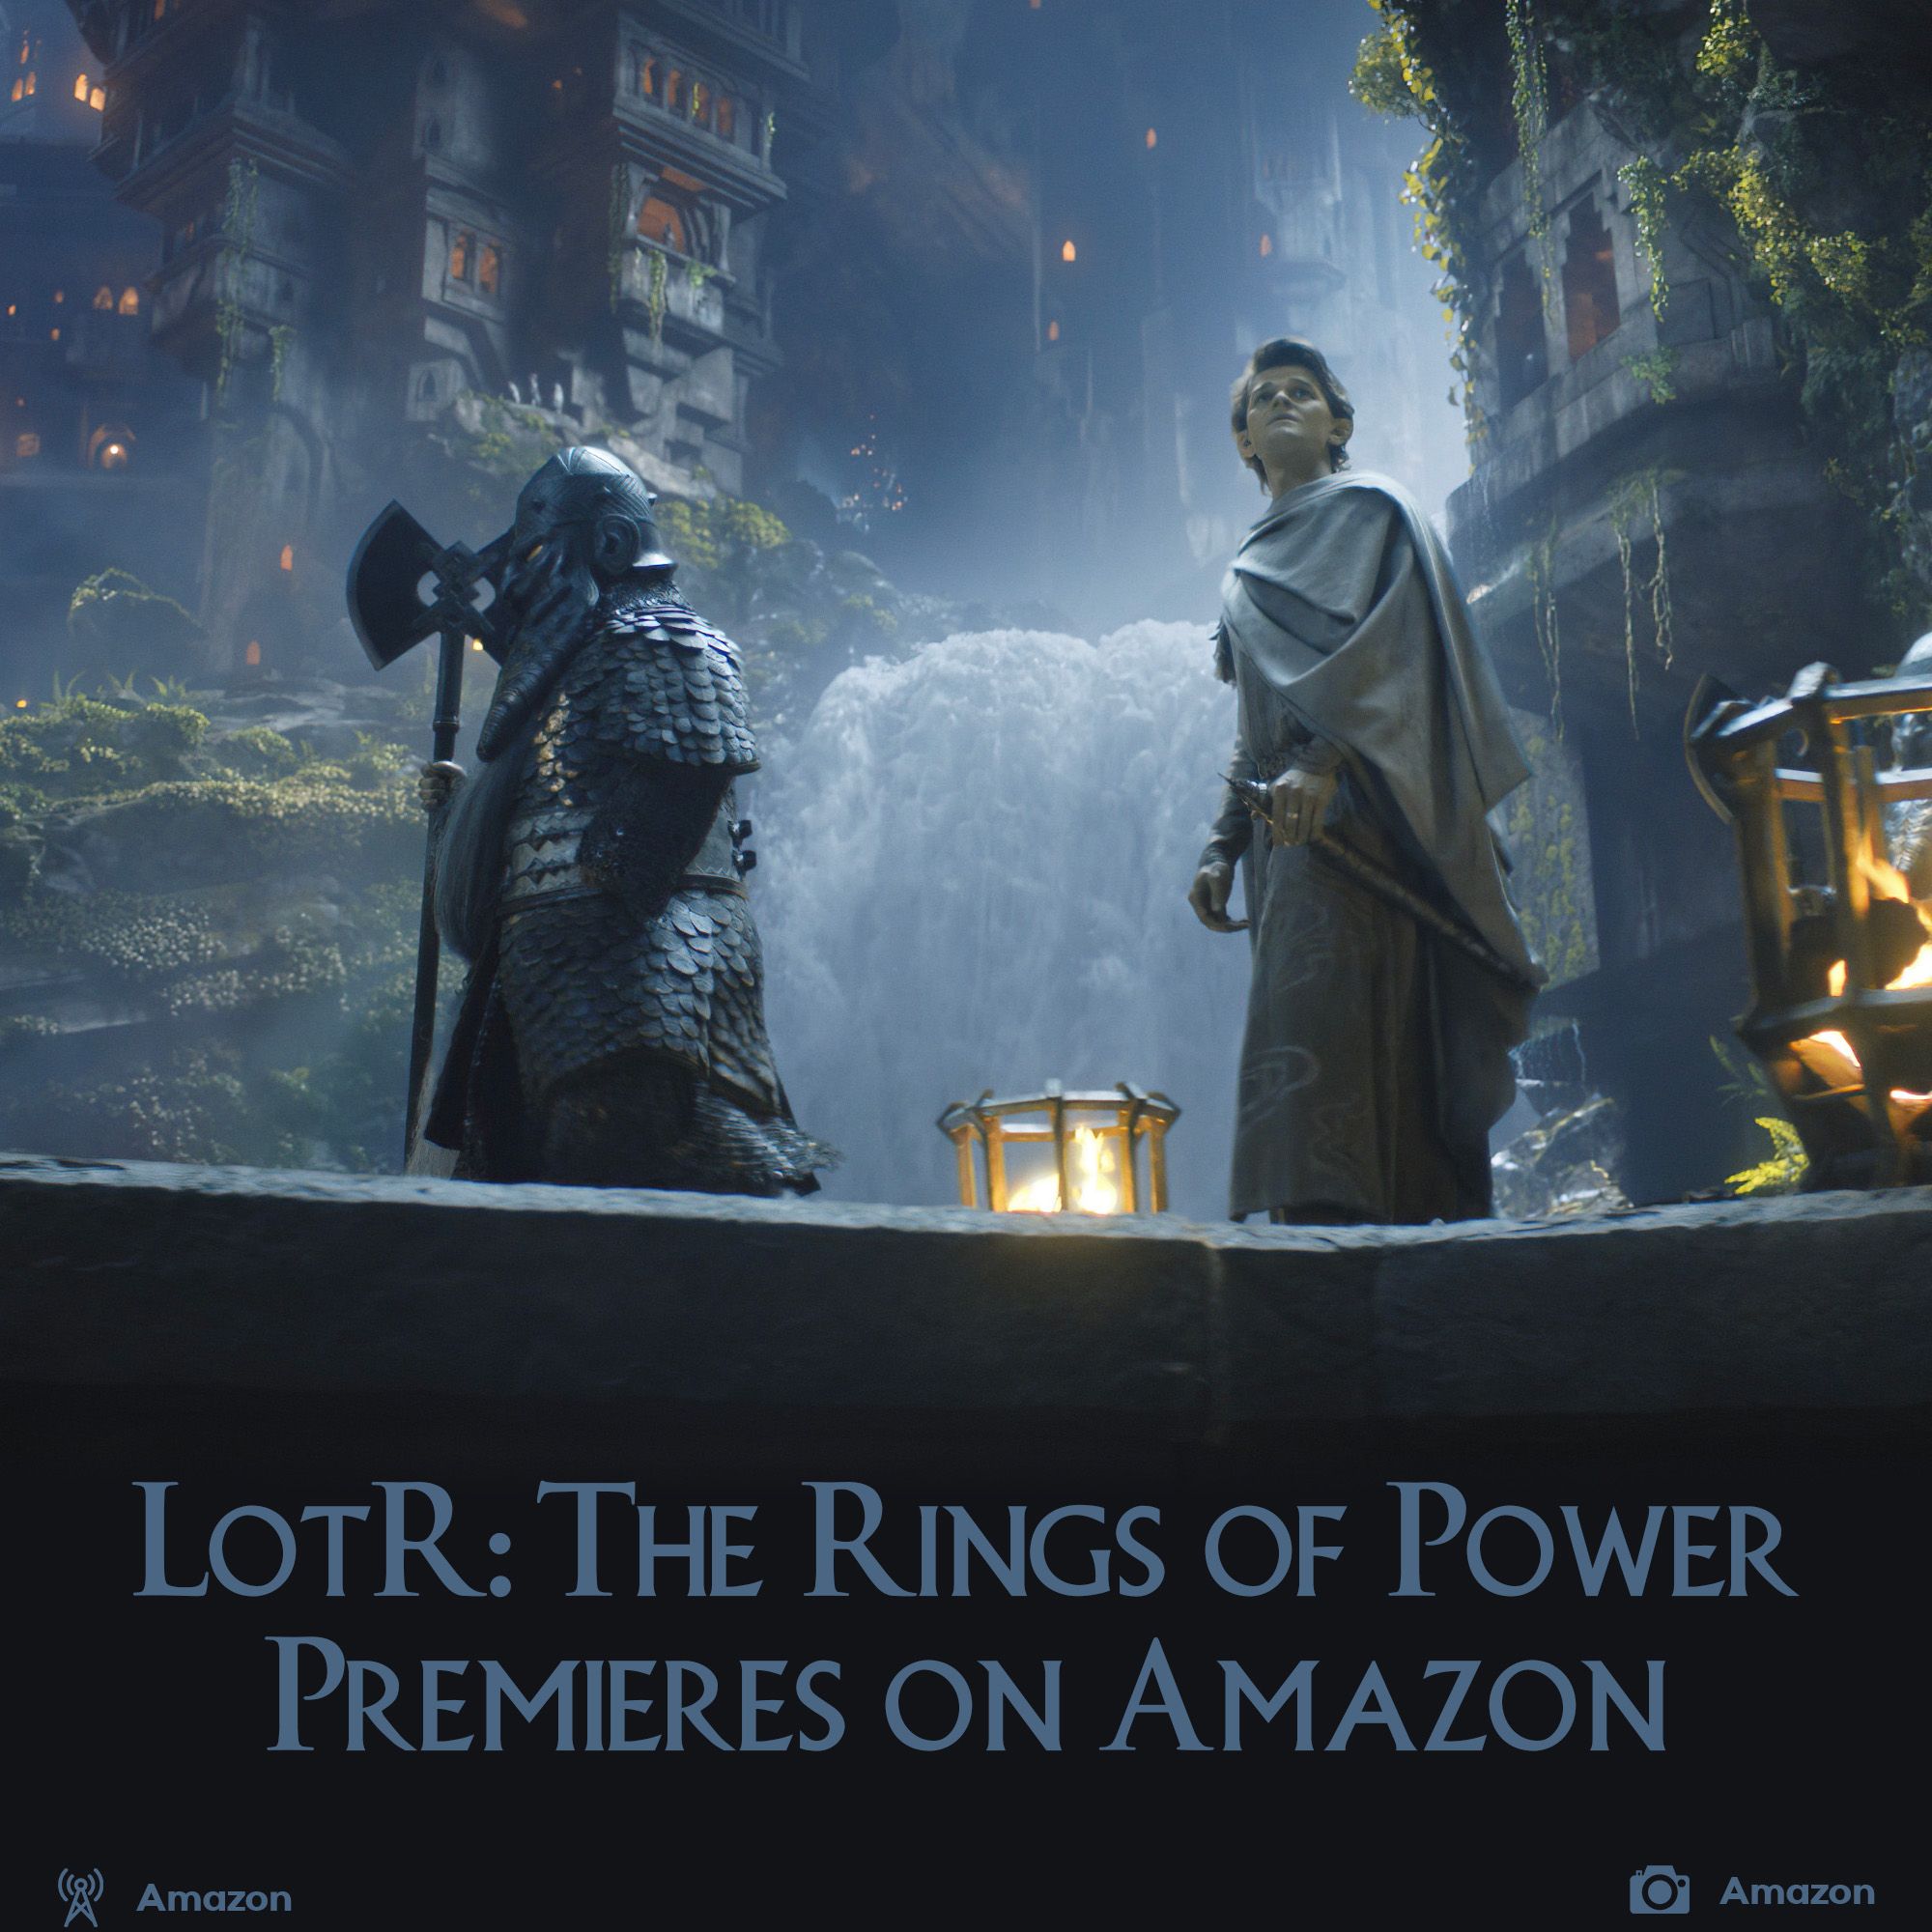 LotR: The Rings of Power premieres on Amazon Prime